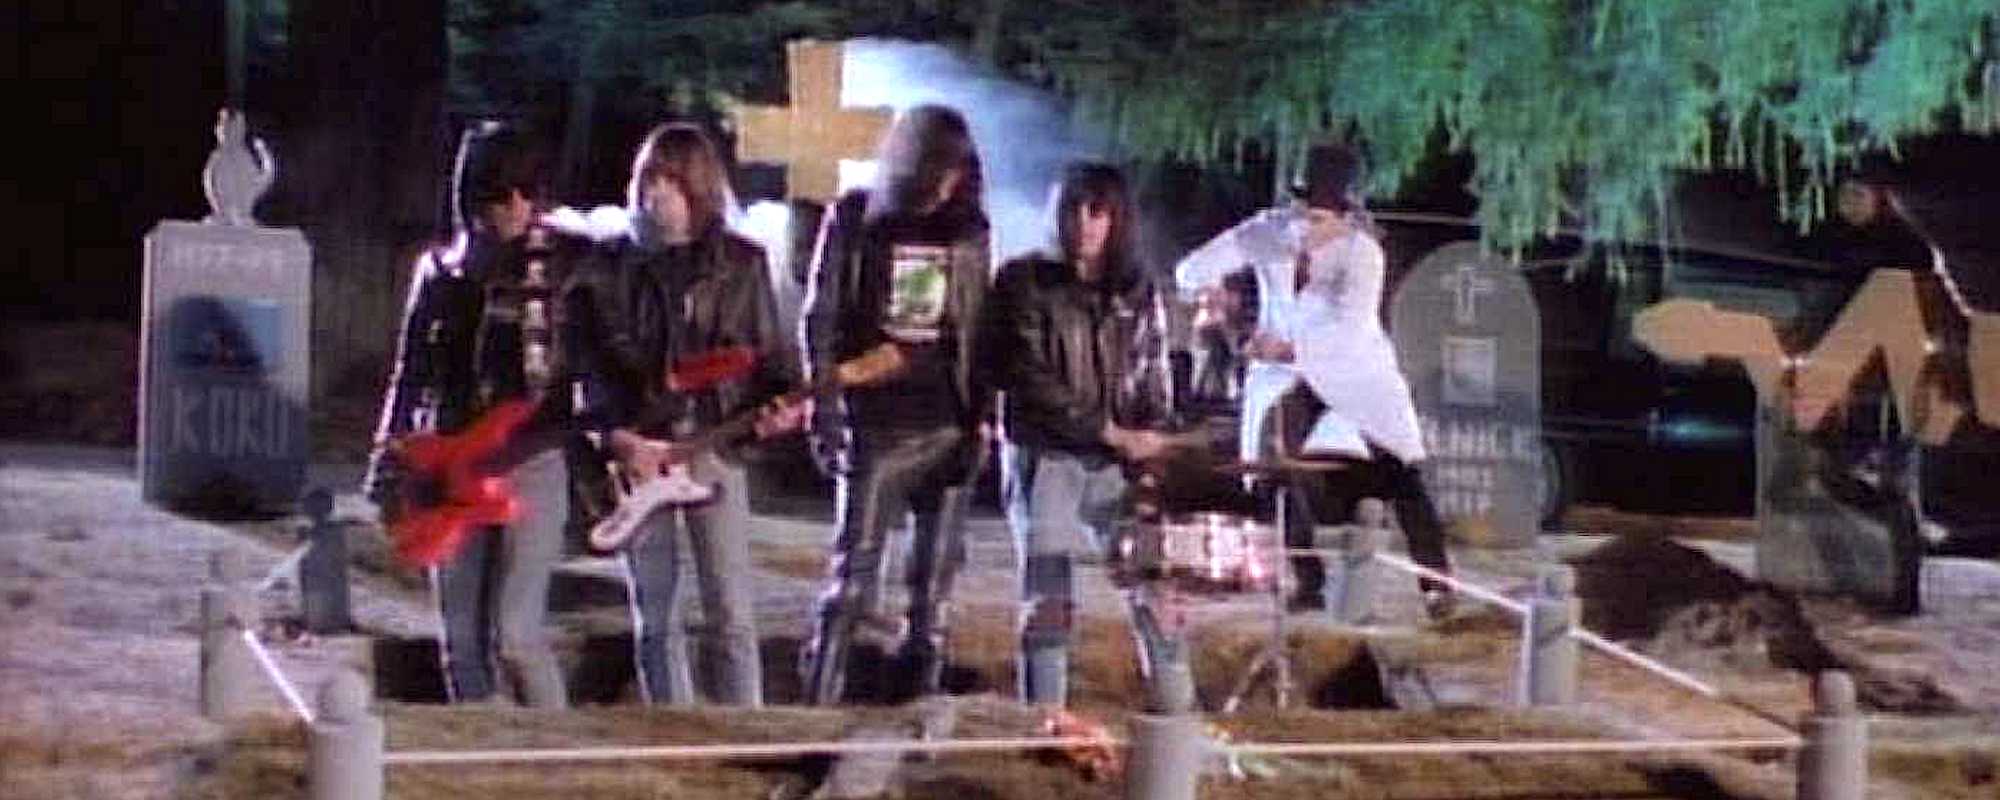 The Story Behind the Stephen King-Commissioned Ramones Hit “Pet Sematary”